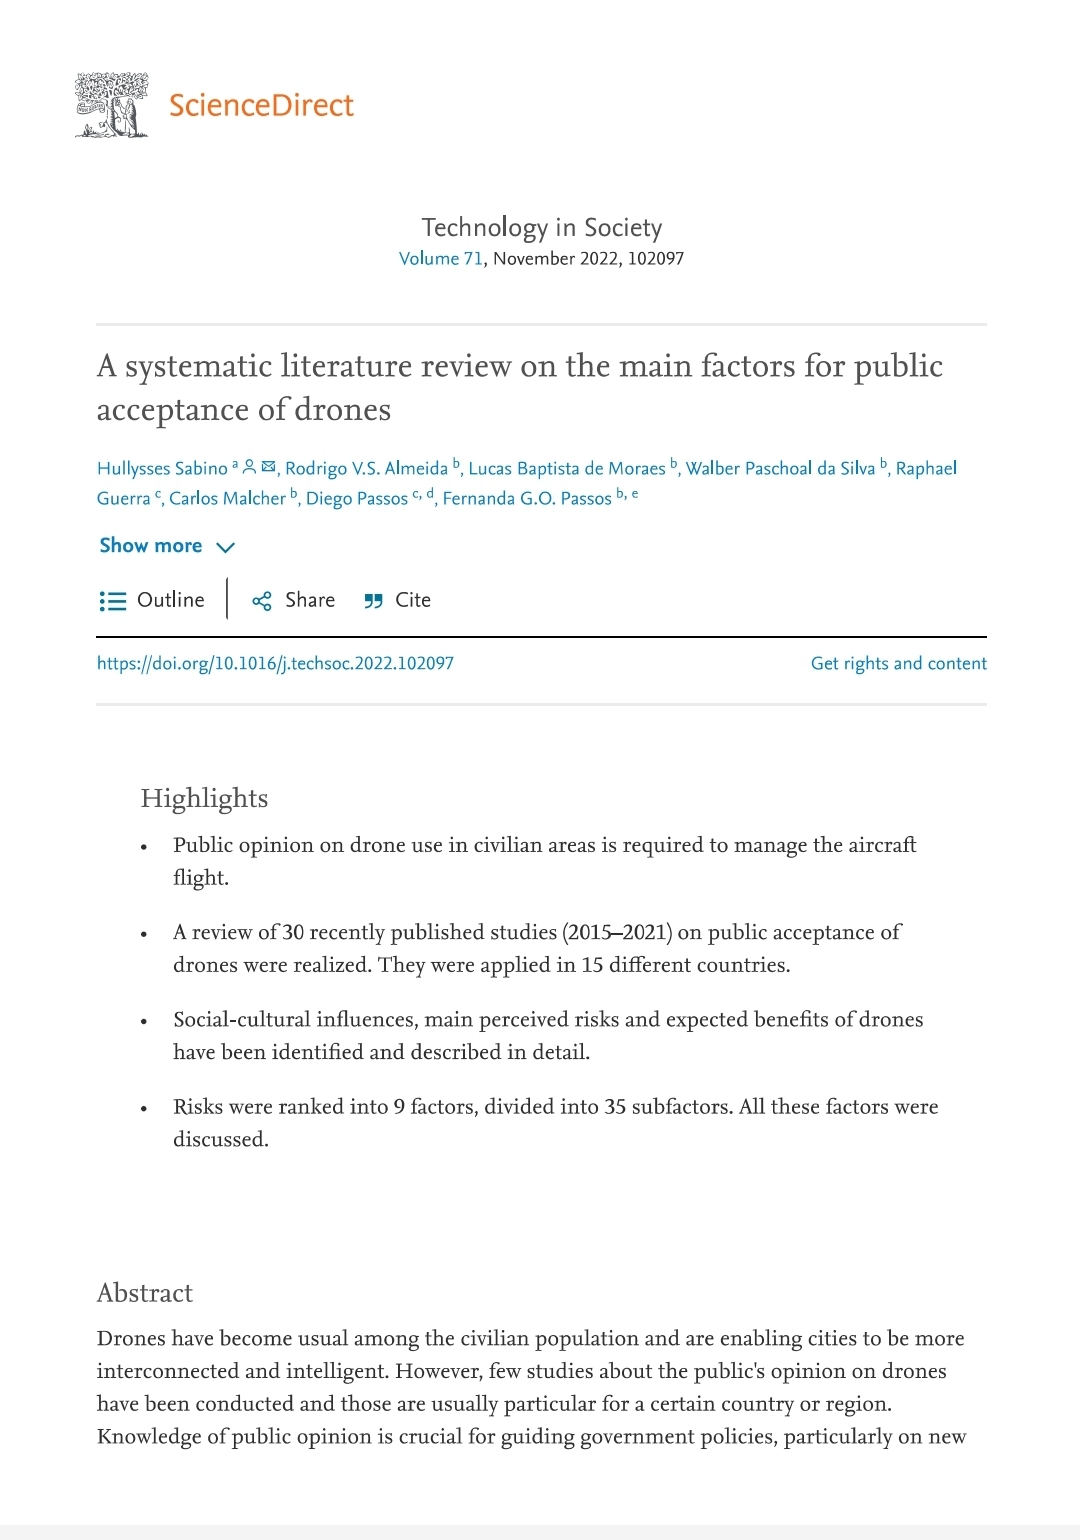 A systematic literature review on the main factors for public acceptance of drones